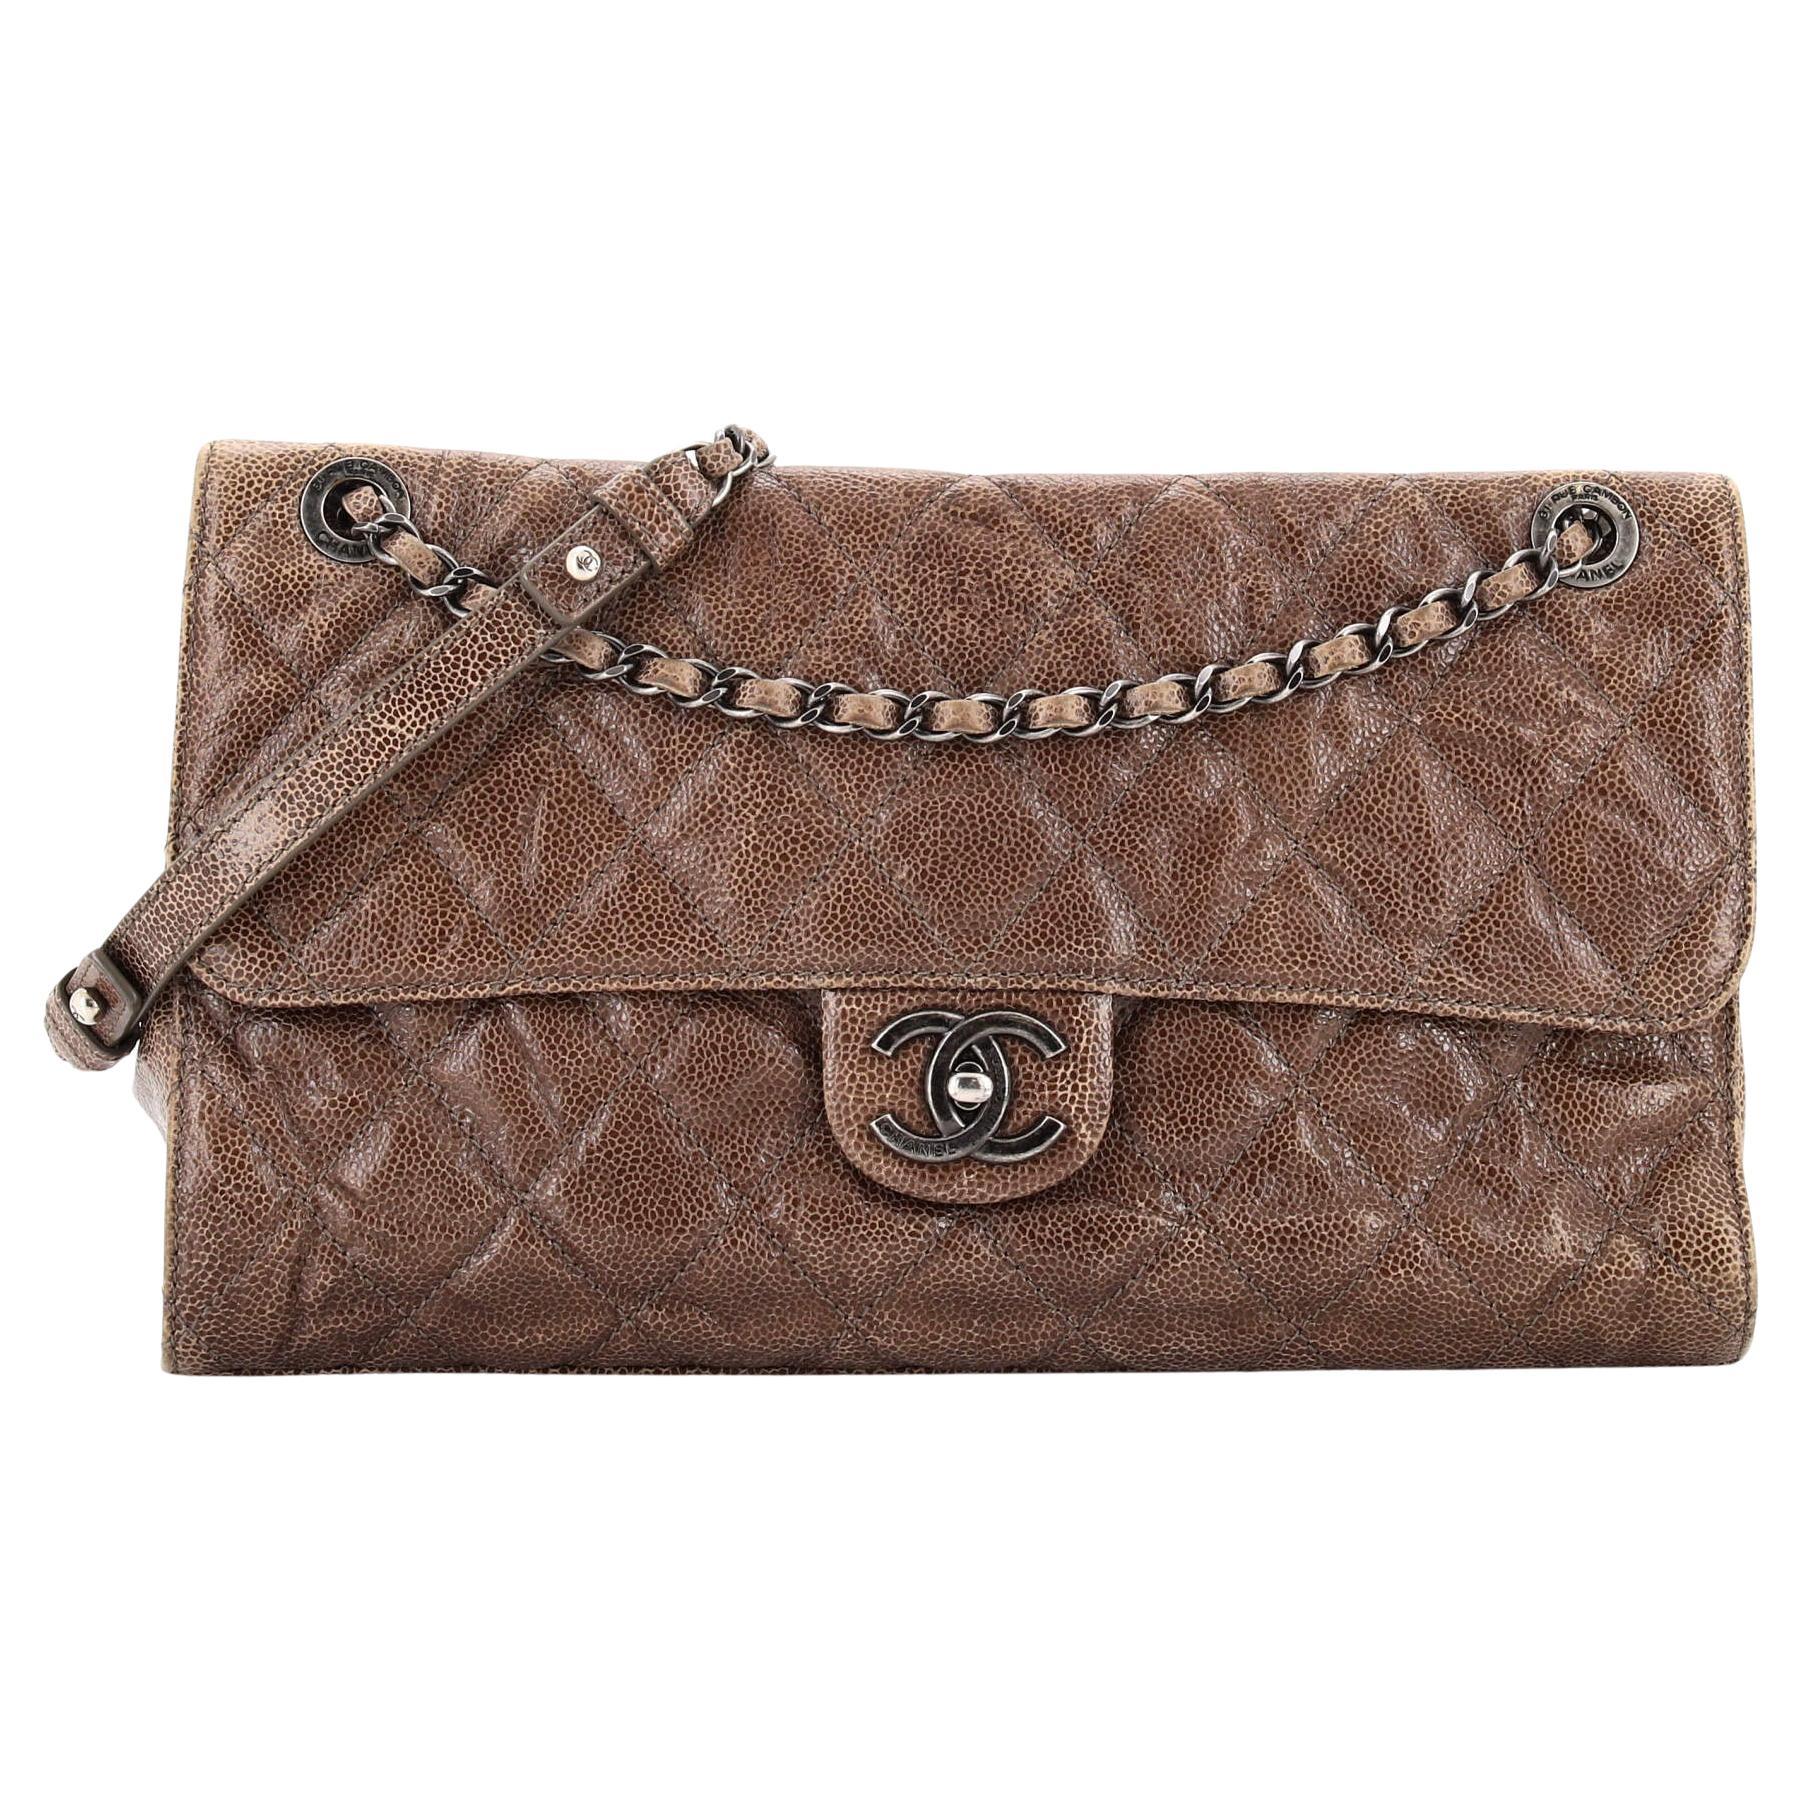 Chanel CC Crave Flap Bag Quilted Glazed Caviar Jumbo